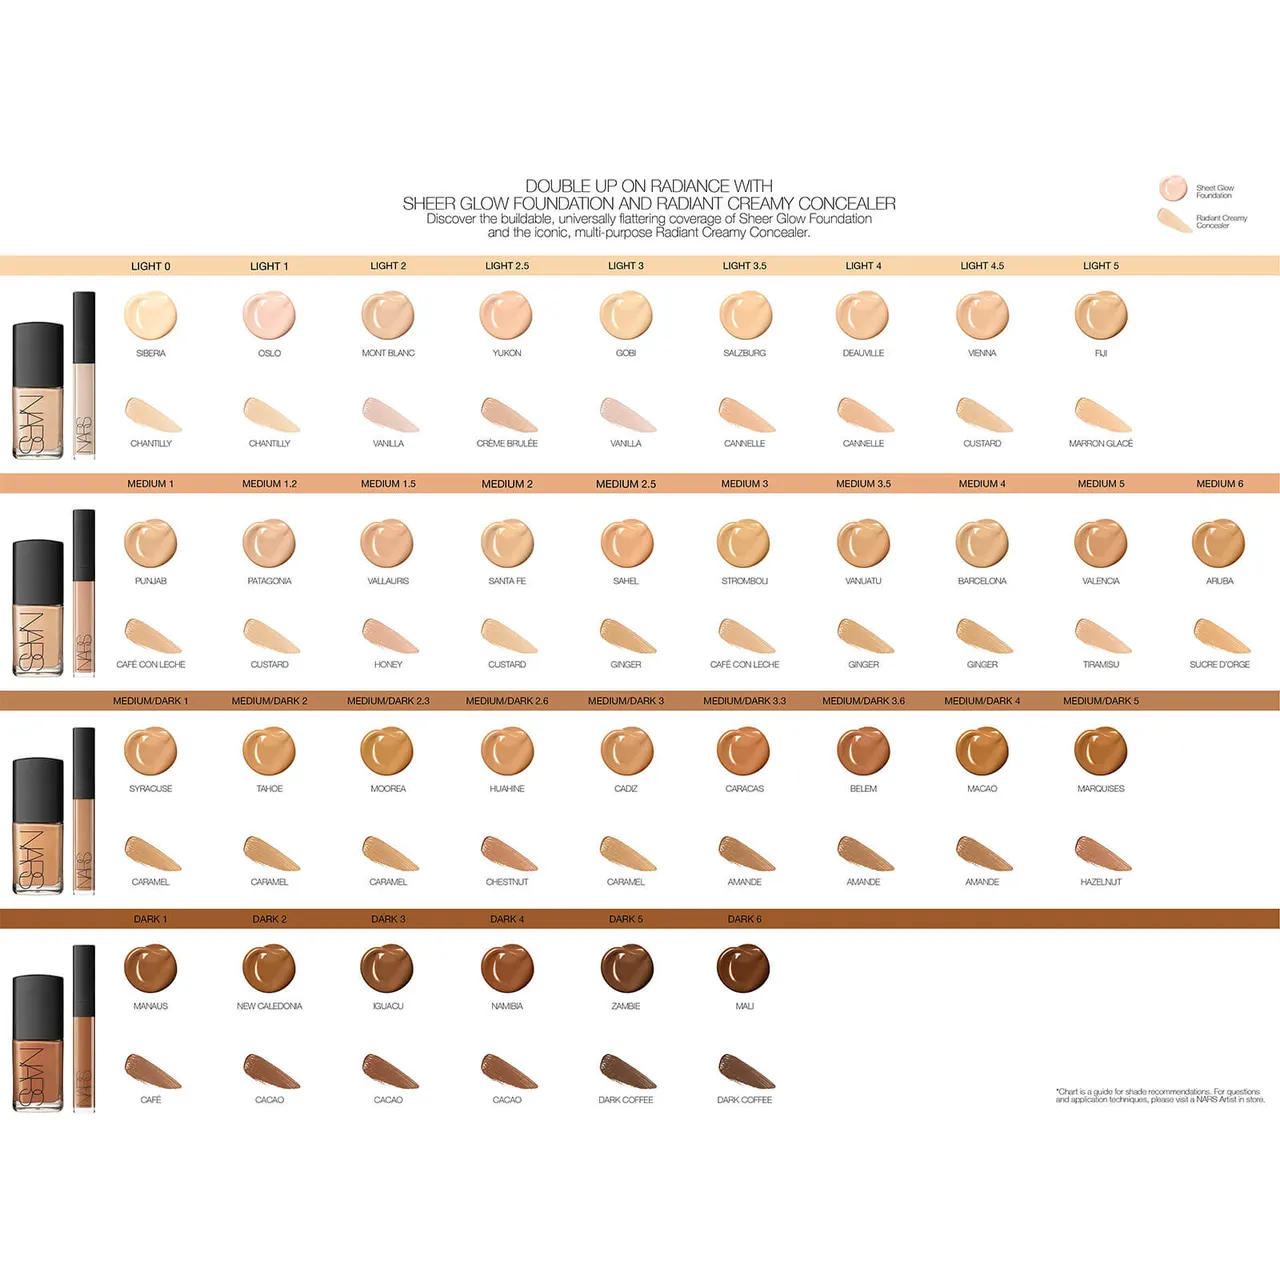 NARS Cosmetics Sheer Glow Foundation (Various Shades) - Deauville